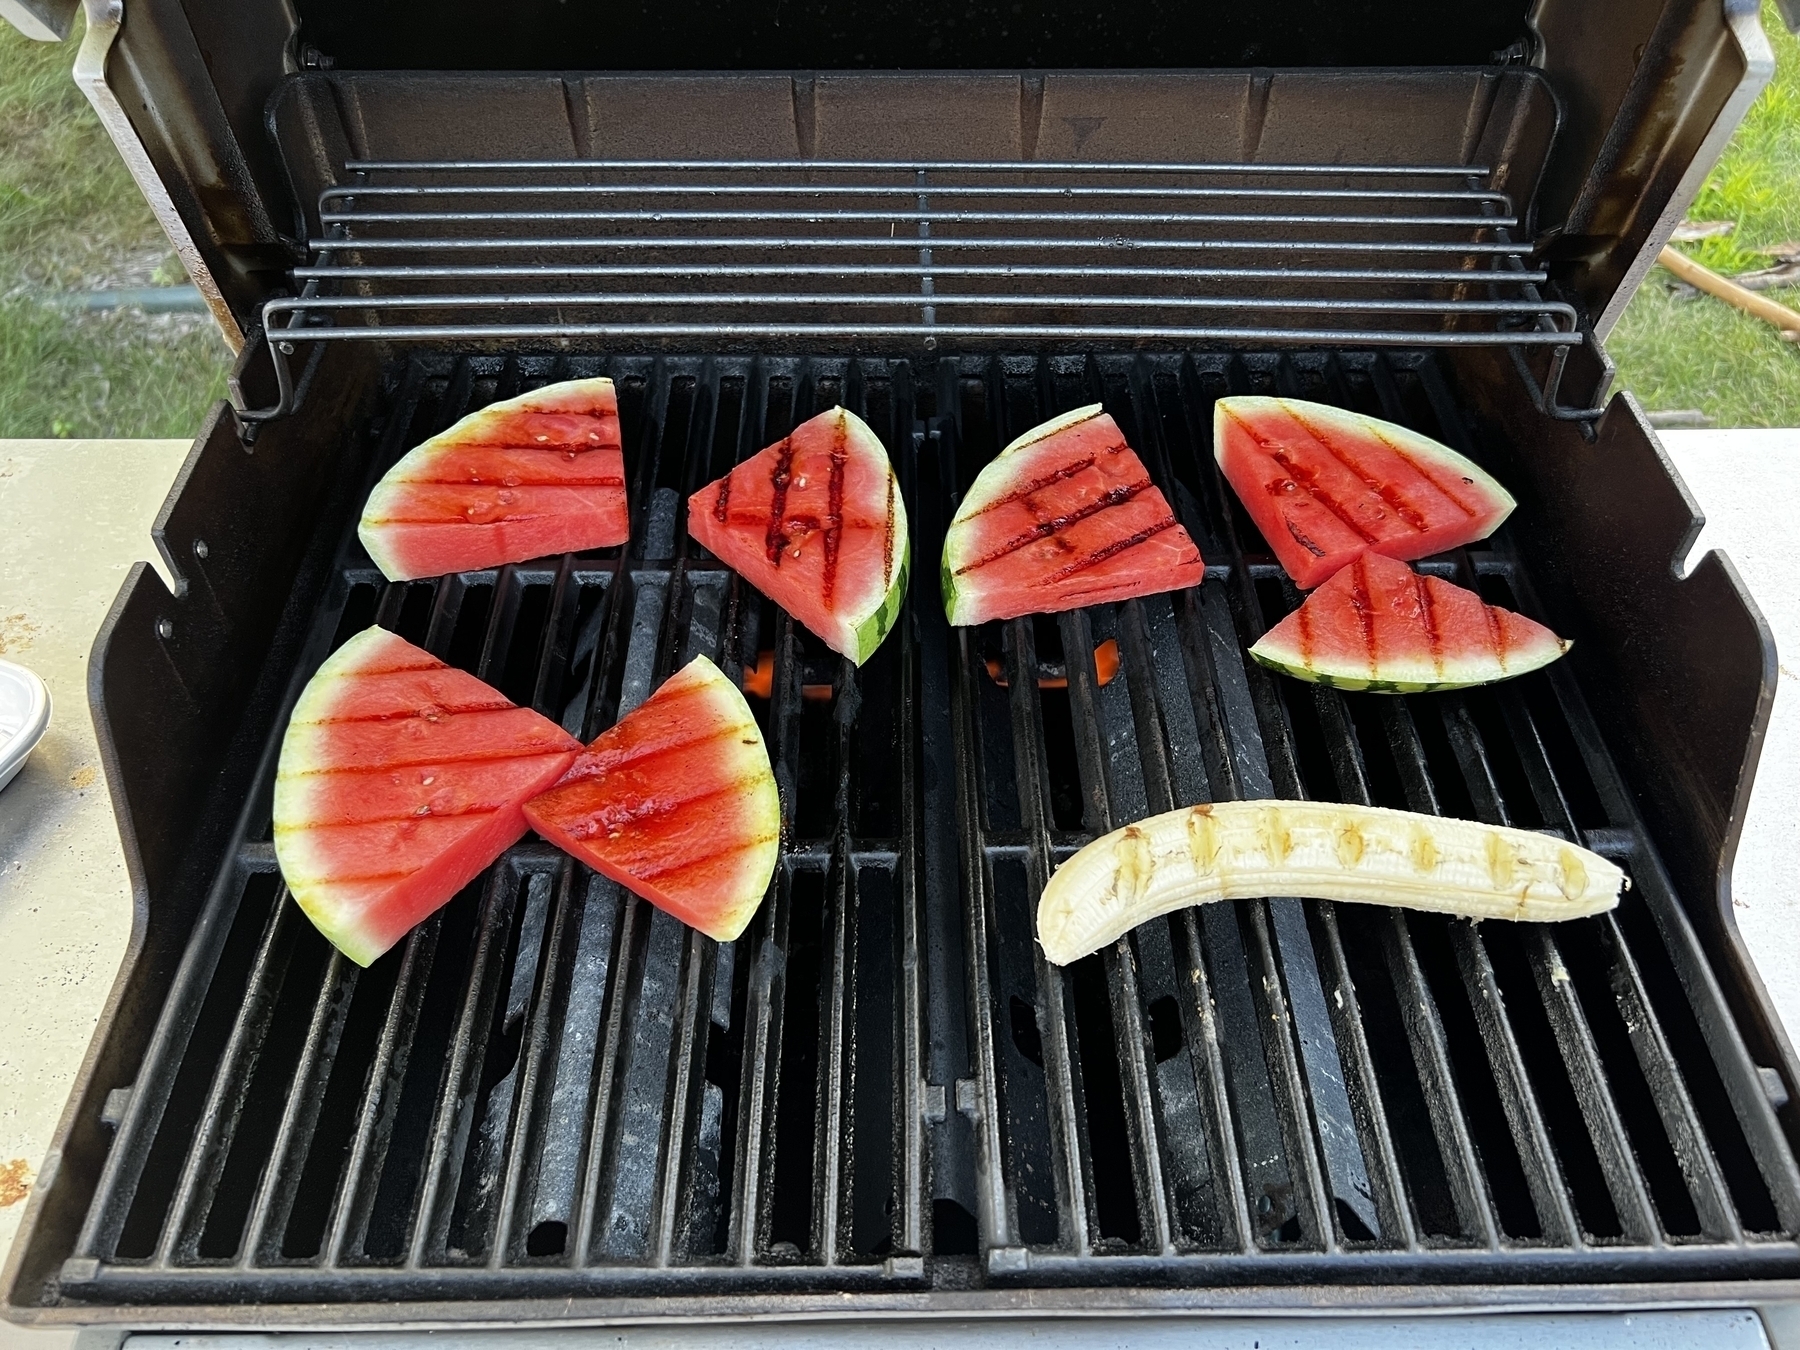 Watermelon slices and banana on a grill 